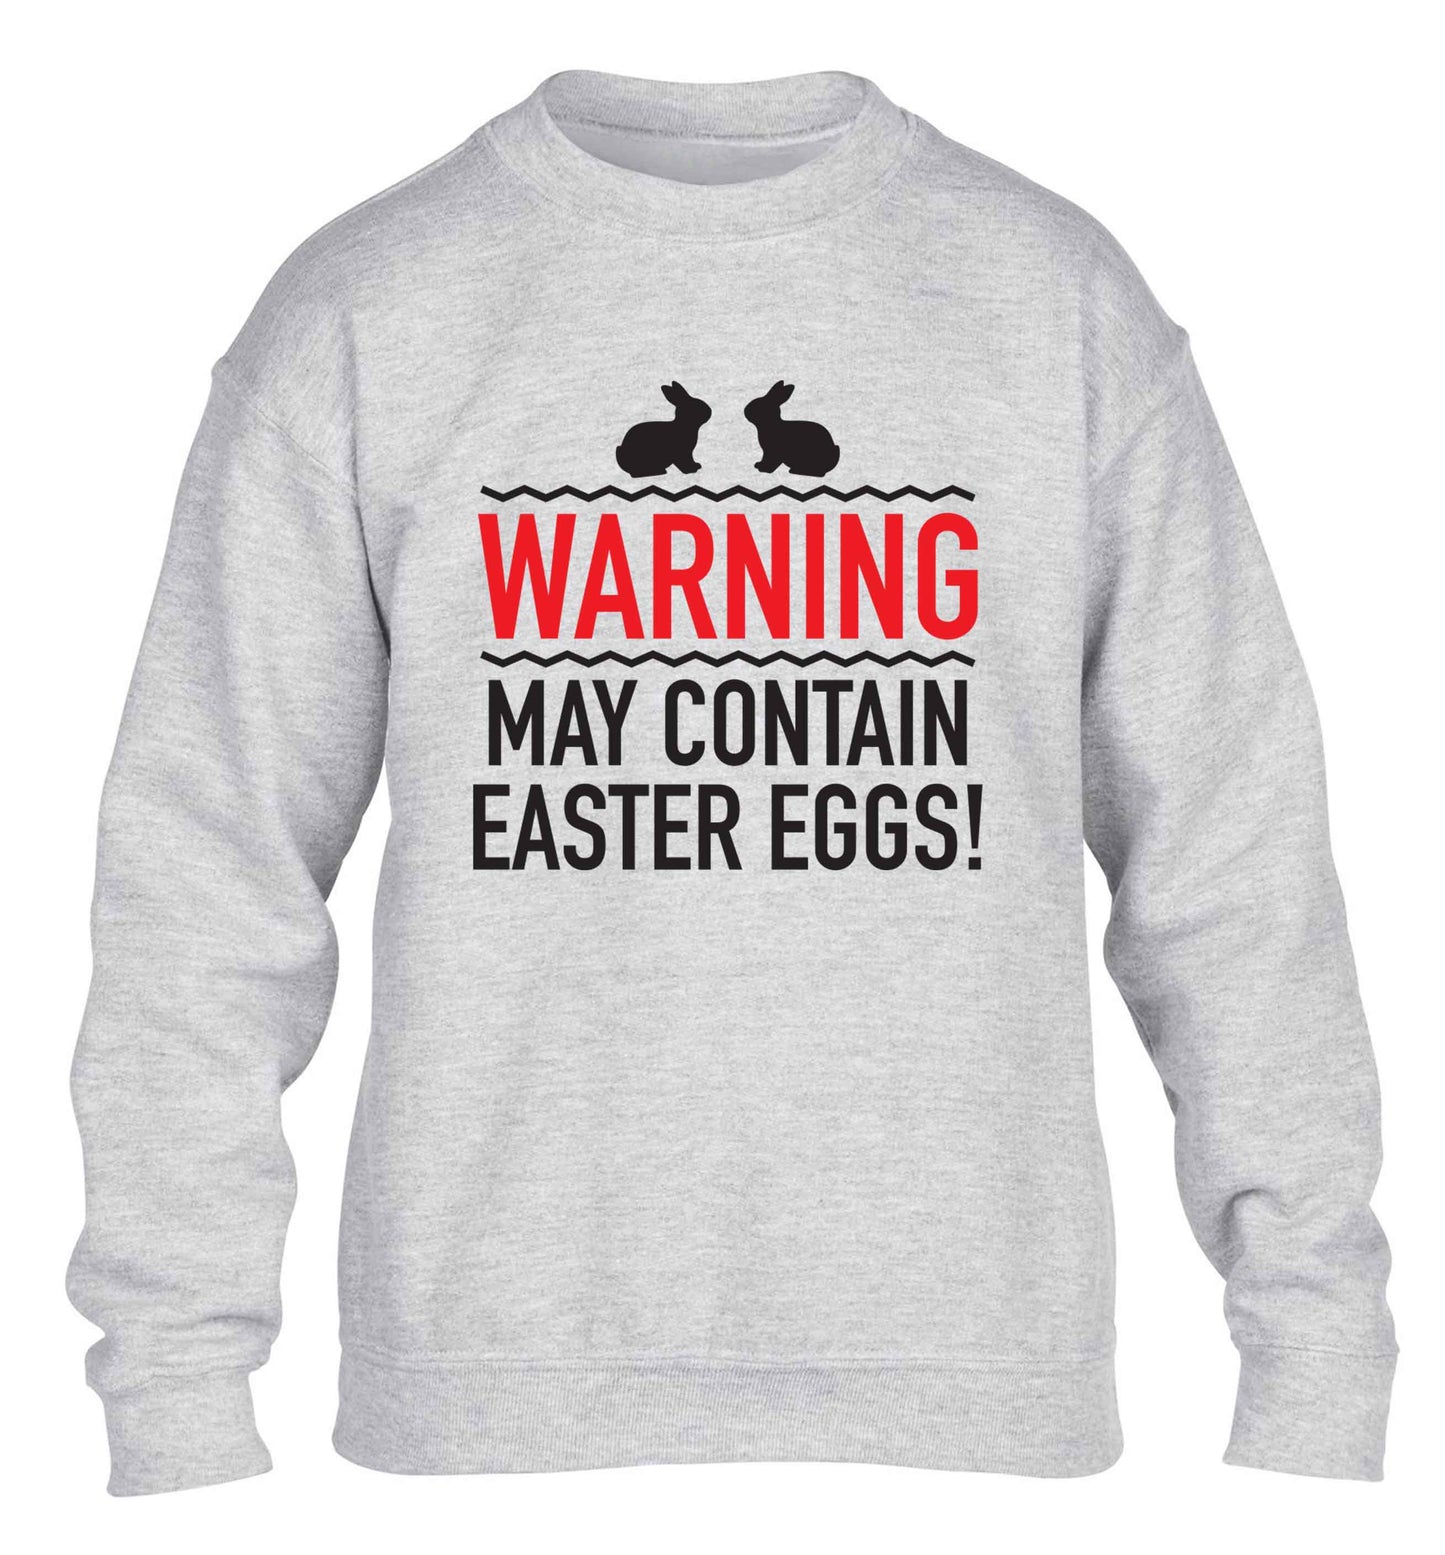 Warning may contain Easter eggs children's grey sweater 12-13 Years